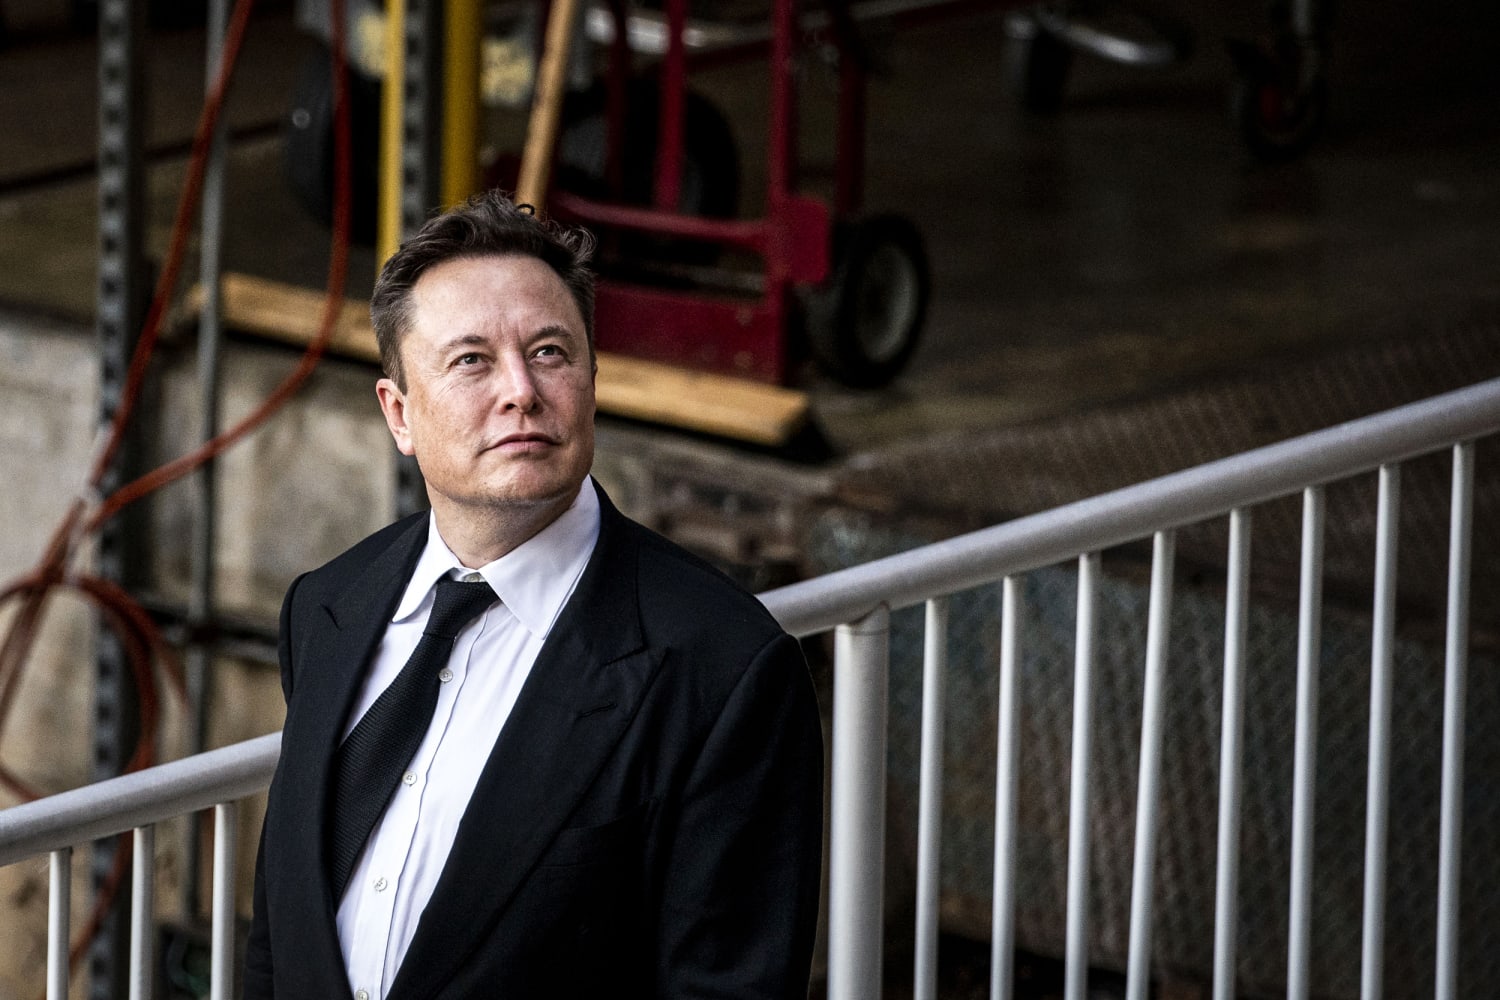 Elon Musk, CEO of Tesla and SpaceX, is Time’s ‘Person of the Year’